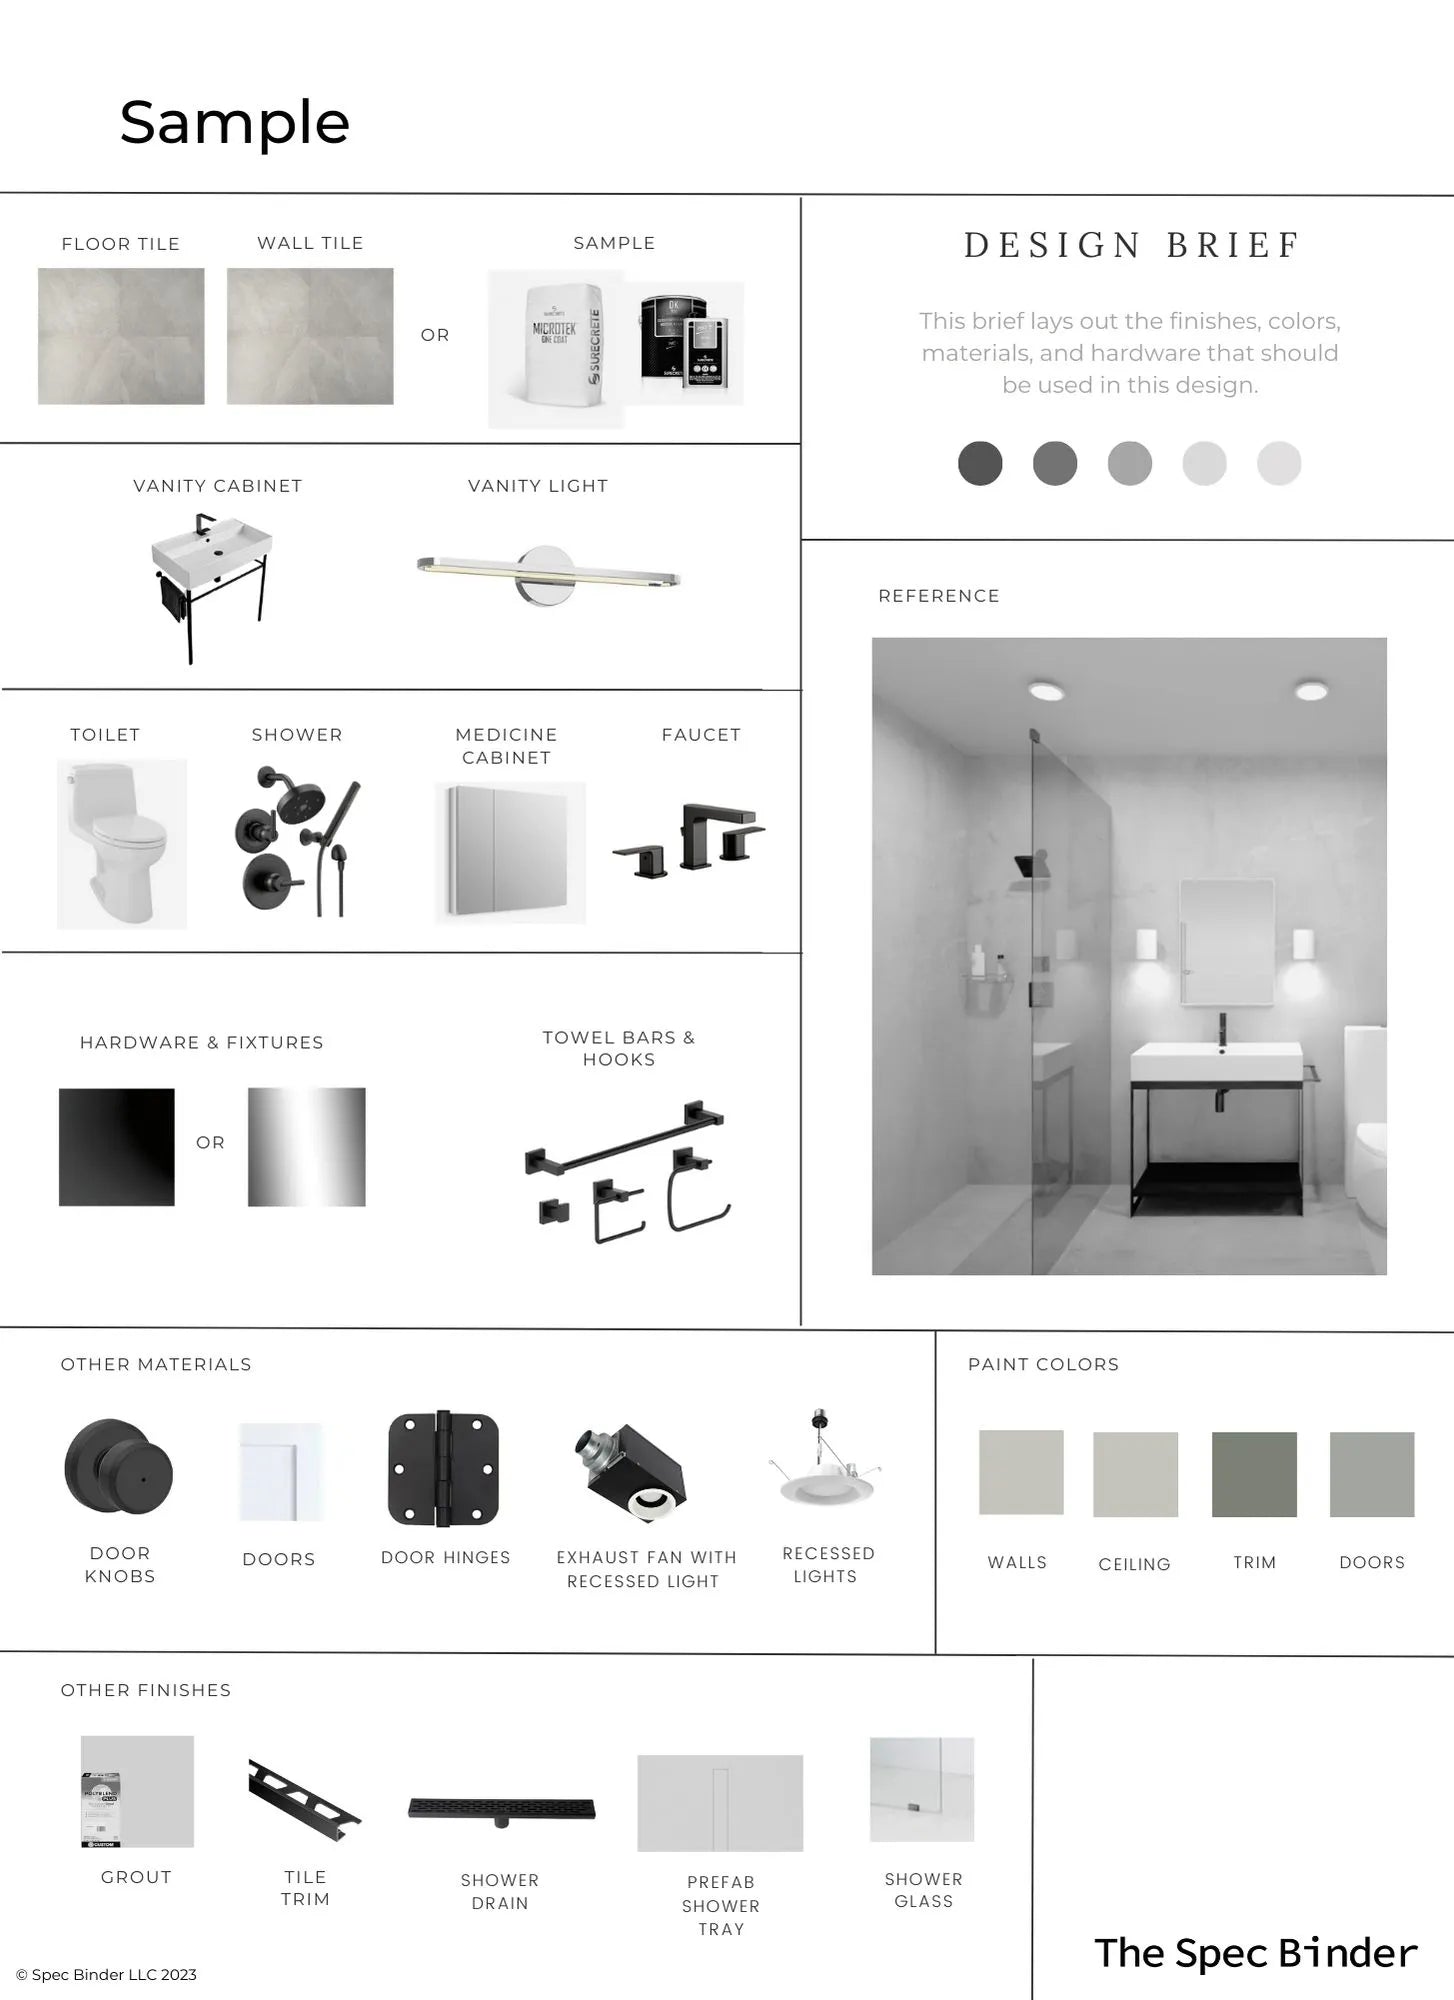 See photos of The Daniel paint colors in different spaces.The Daniel Full Bath reference images, paint samples, color swatches, and design elements. The Daniel bathroom design is Sleek, Dark, Cool, and Modern. The Daniel room design includes 3D renderings, mood boards, color and finish palettes, paint schedules, tile schedules, design brief, product selections, an editable budget document, and a link for one-on-one phone support with our team of professional interior designers.